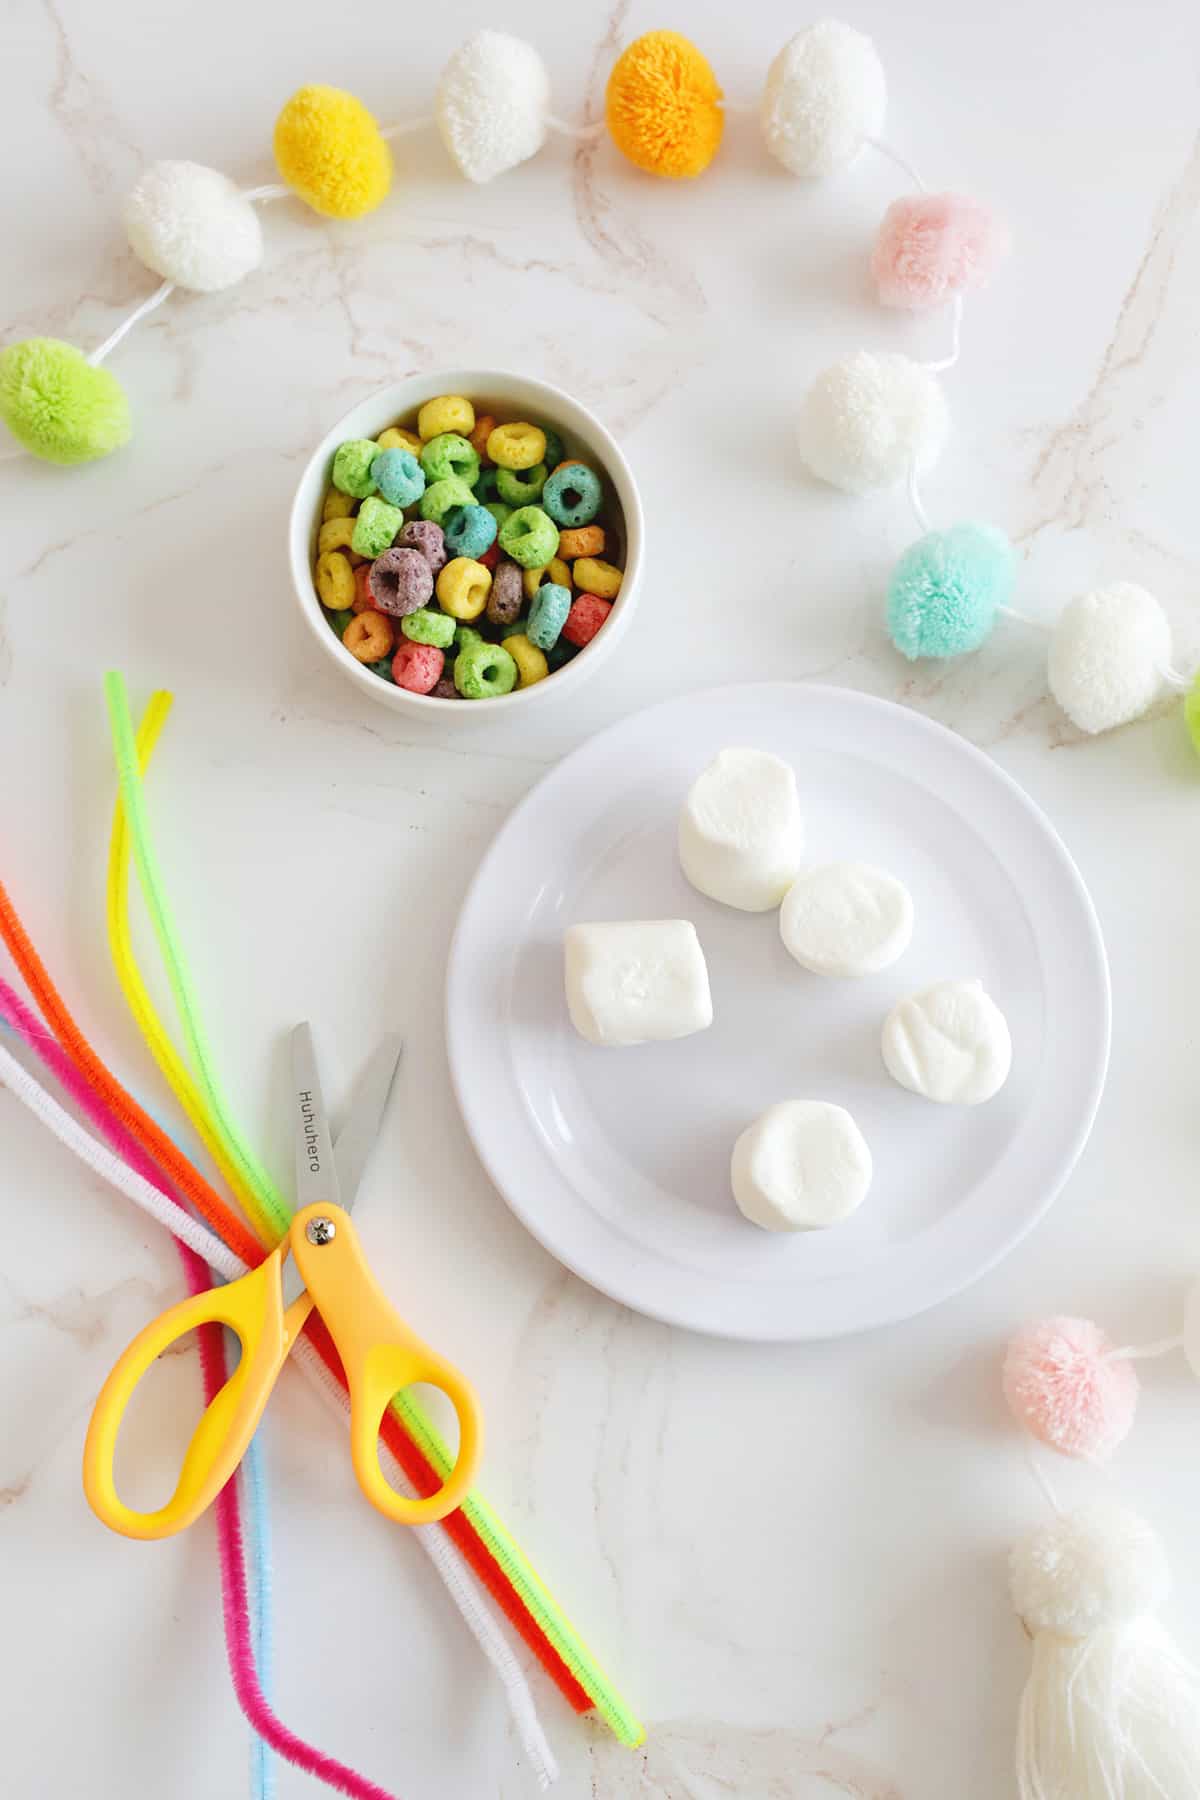 fruit loops, pipe cleaners, and marshmallows for rainbow craft 